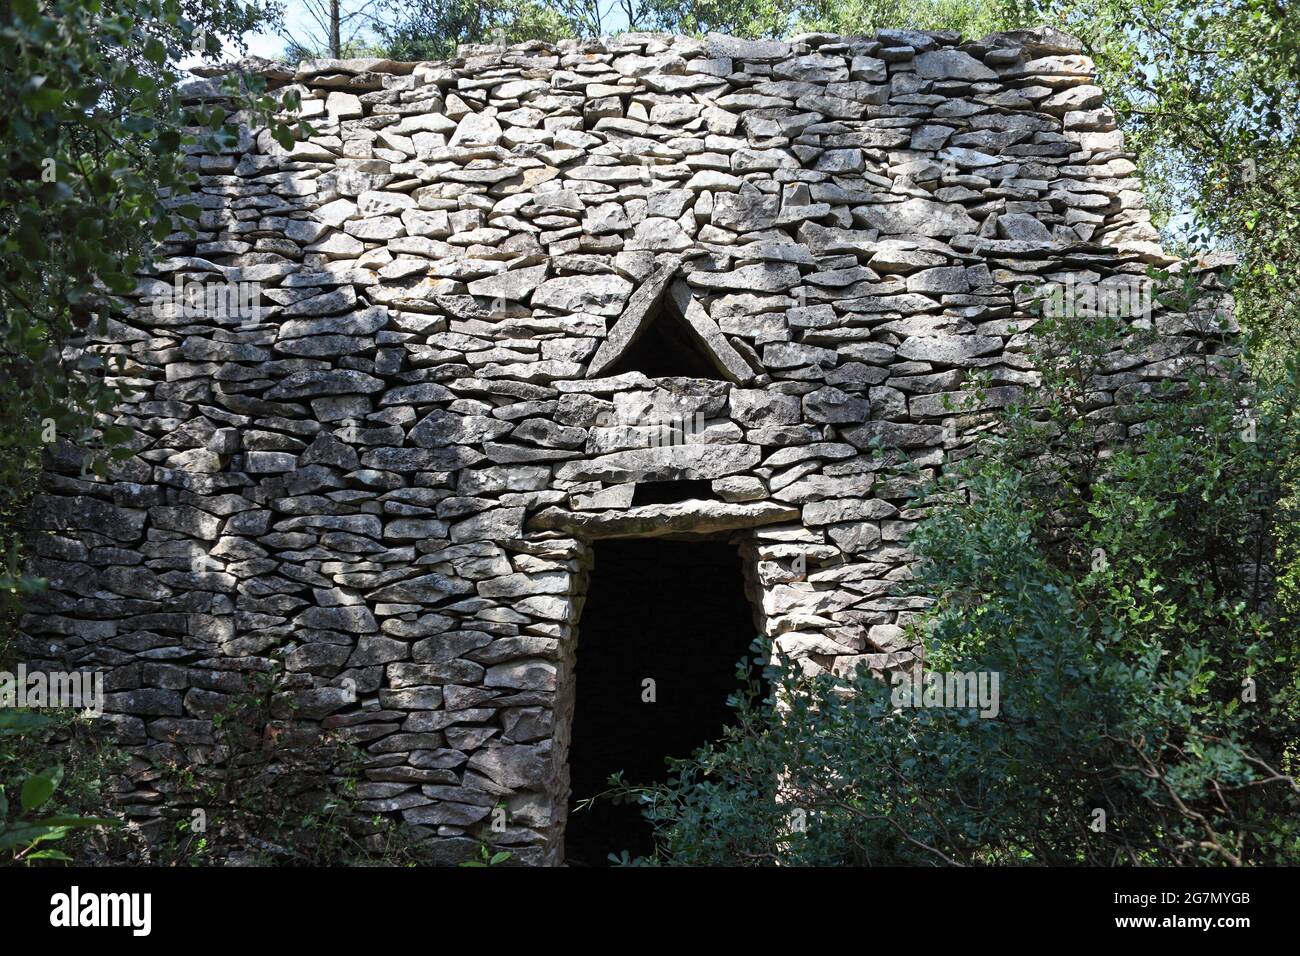 Cabane de Mourin, one of the capitelles in the Garrigue woods, Congenies, Gard, Occitania, France. Stock Photo